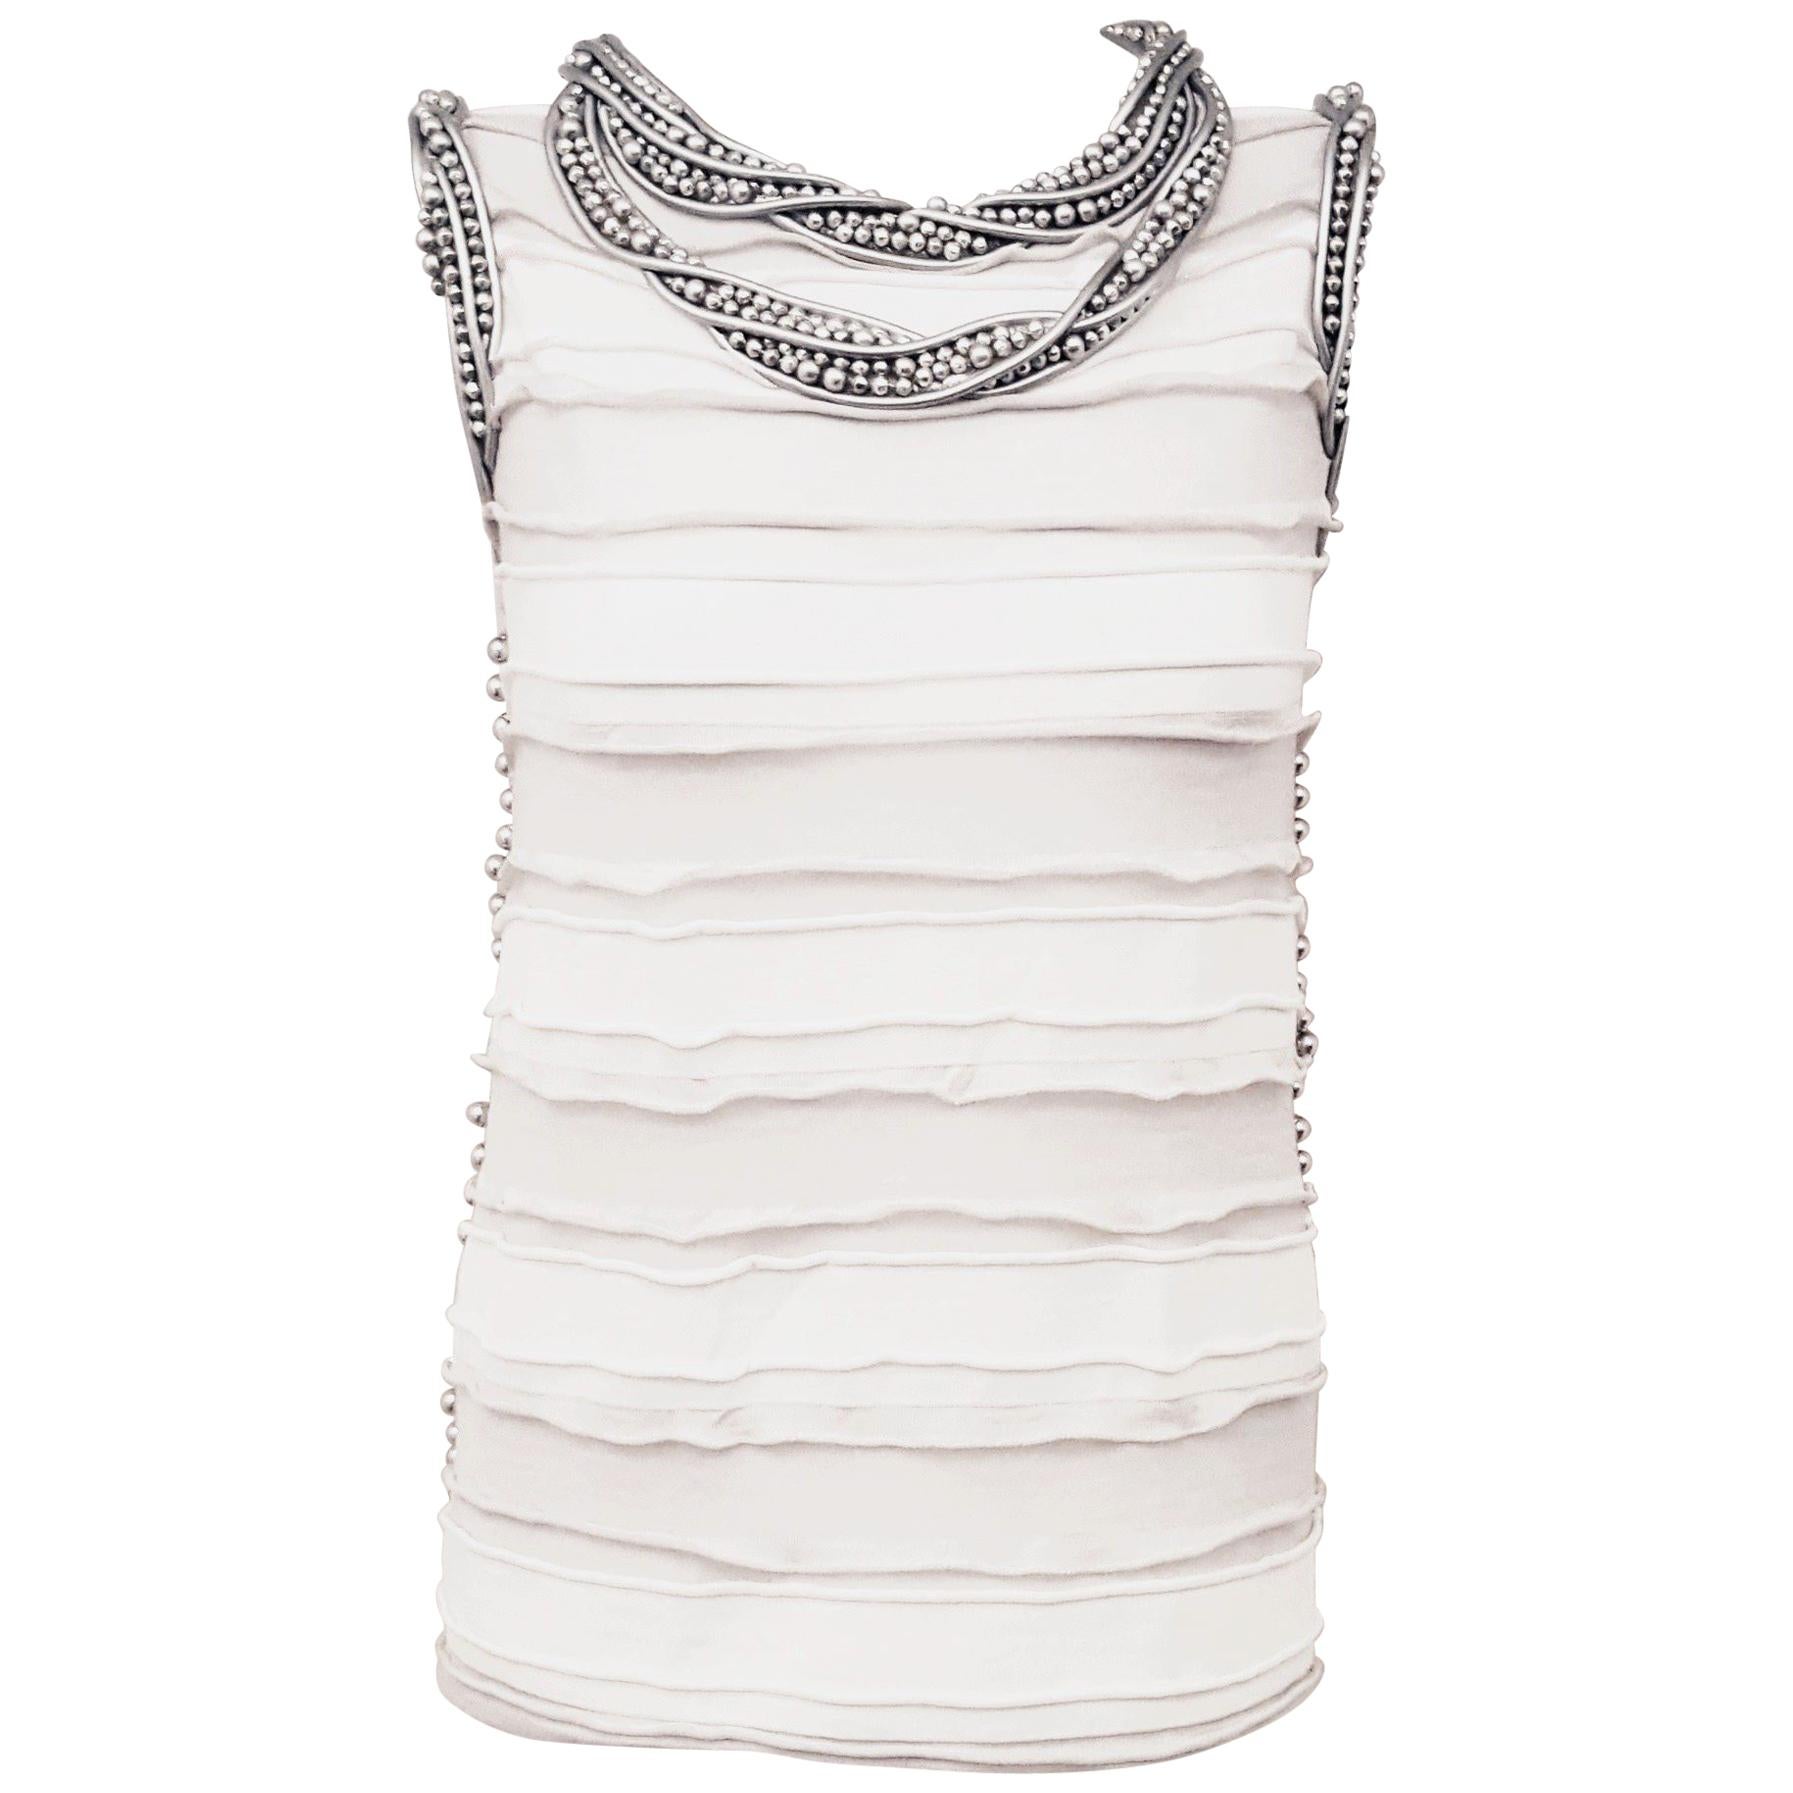 Chanel White and Grey Ruched Top Embellished W/ Silver Tone Faux Pearls 